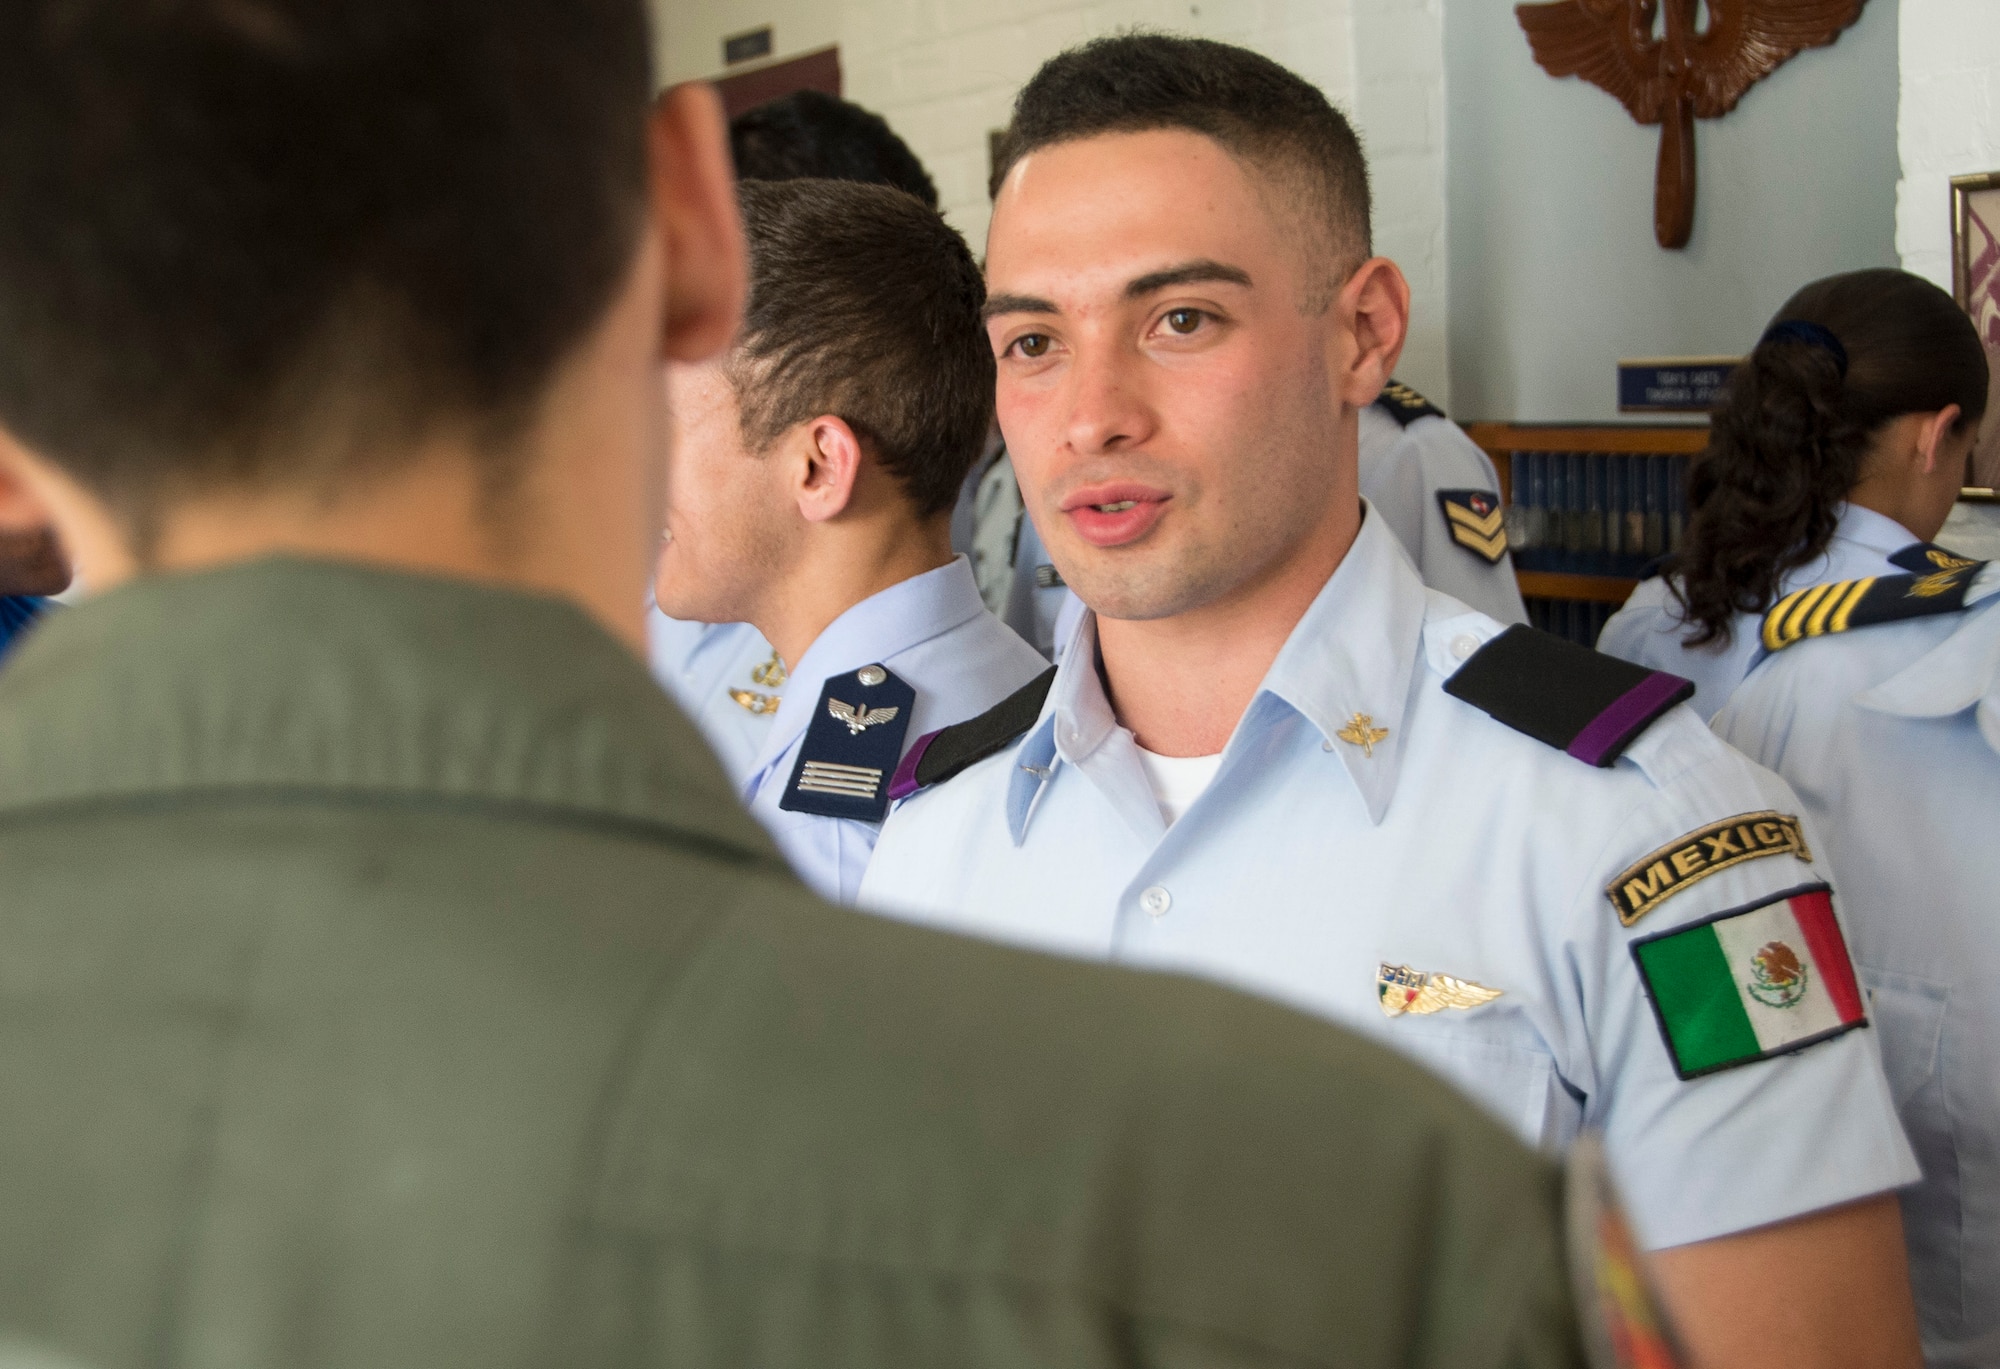 A Latin American Cadet Initiative (LACI) cadet speaks with a U.S. Air Force Reserve Officer Training Corps cadet, from ROTC Detachment 20, during a program familiarization tour at the University of Arizona, Tucson, Ariz., and Oct. 13, 2016. The LACI program allows cadets from Latin American air force academies to visit the U.S. for three-weeks to familiarize them with the U.S. Air Force and receive briefings on culture, history, and diverse missions from Air Force bases around the U.S. (U.S. Air Force photo by Staff Sgt. Adam Grant)
